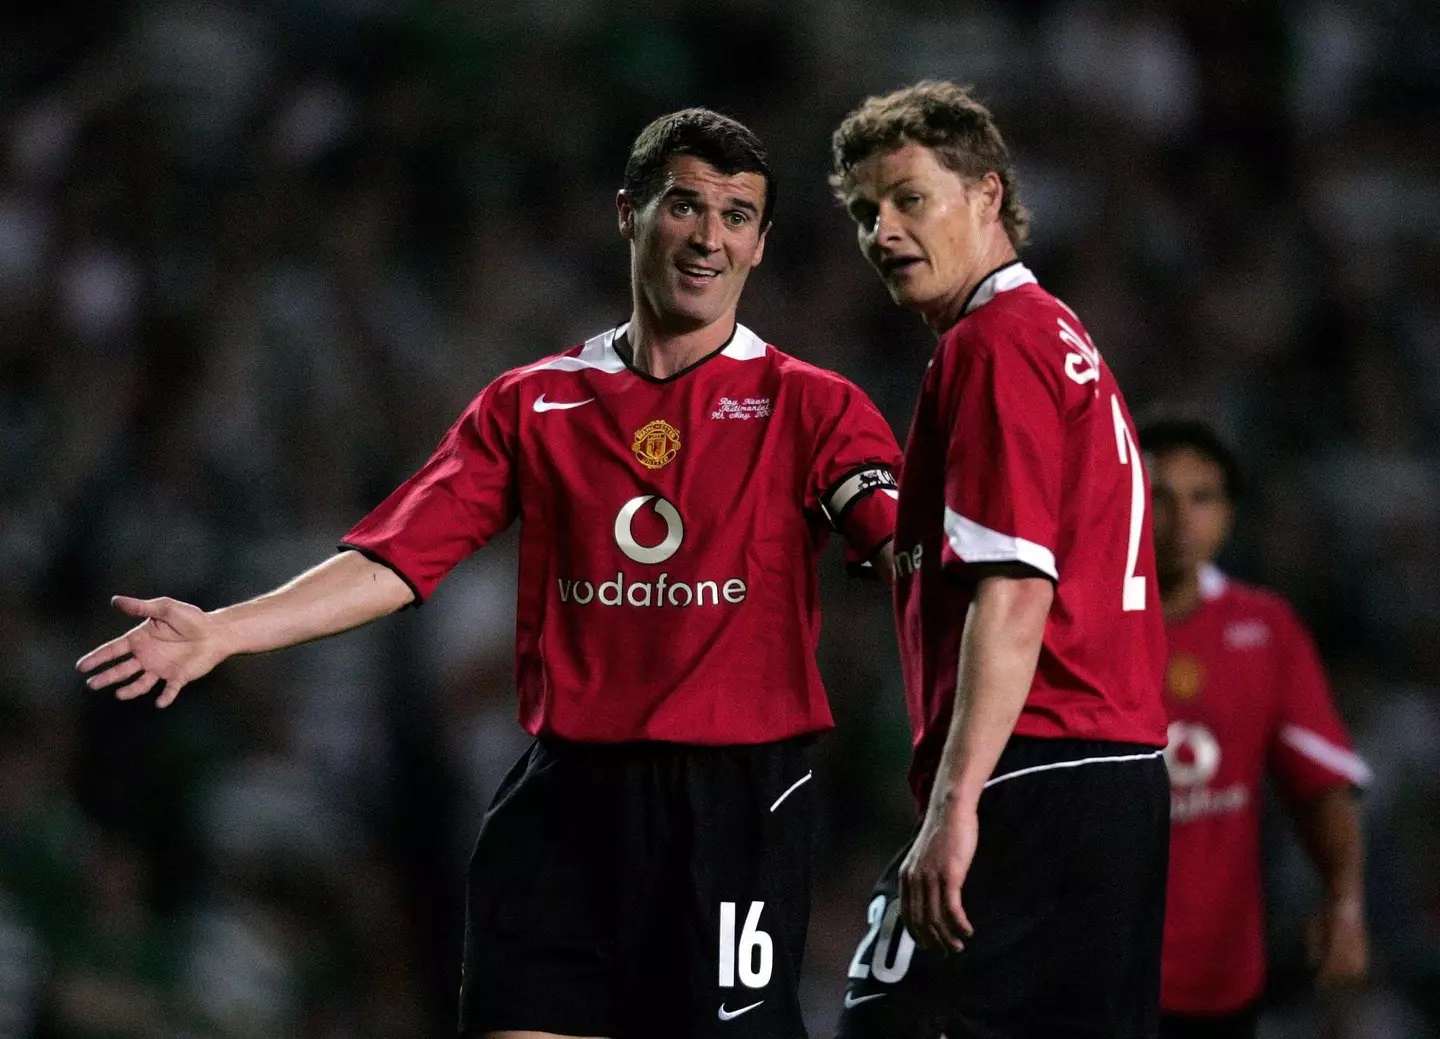 Keane and Solskjaer were vital to United's success in the late 90s and early 2000s. (Image